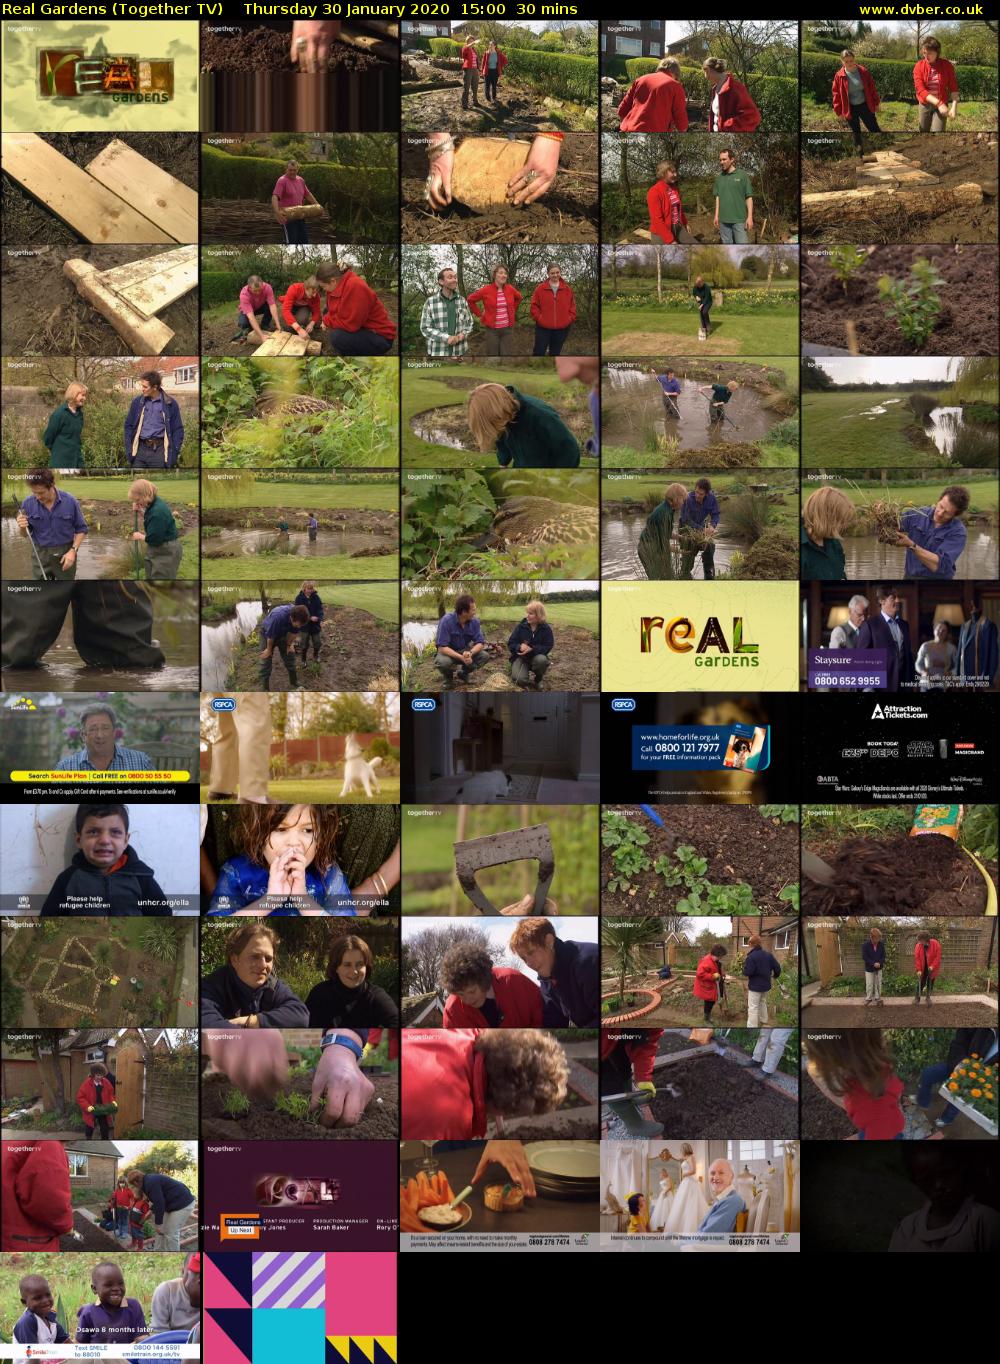 Real Gardens (Together TV) Thursday 30 January 2020 15:00 - 15:30